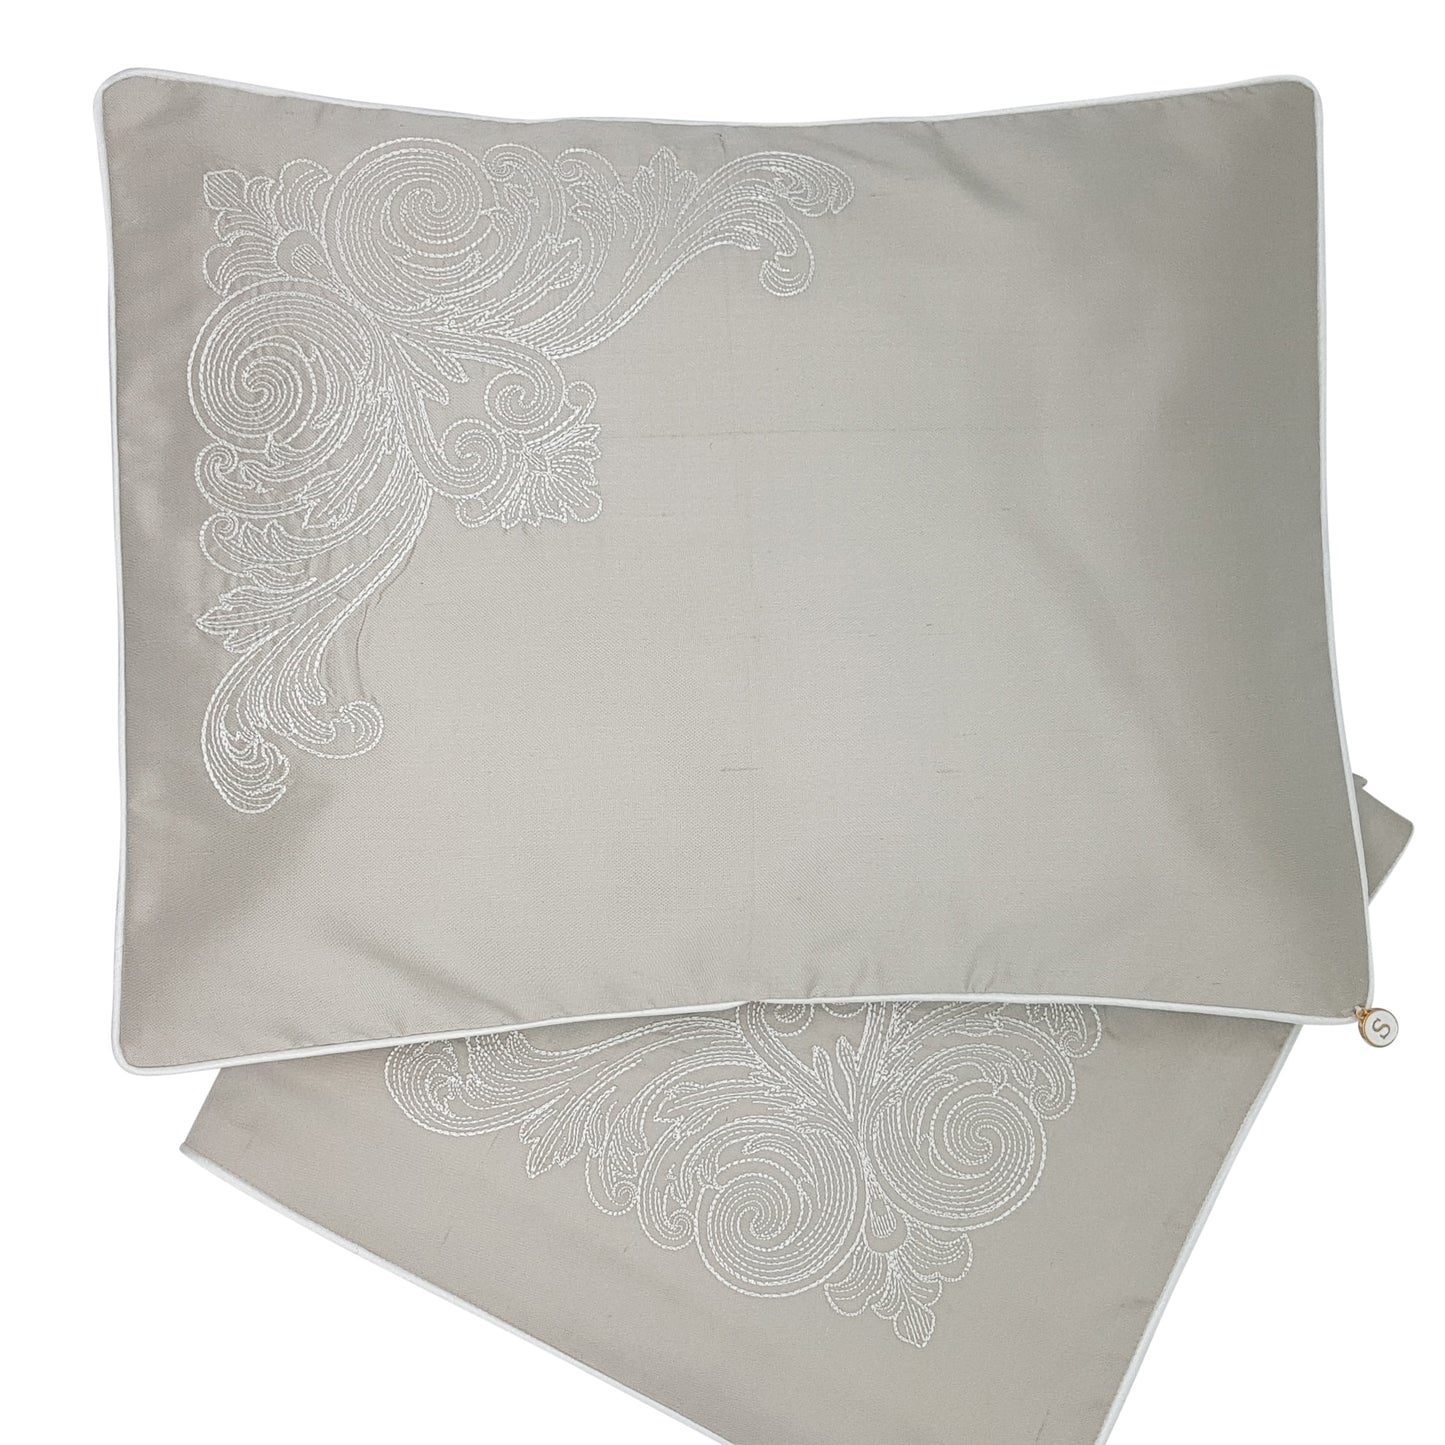 Limited Edition Wrap and Pillowcase Set, Soft Grey Silk with Cream Embroidery